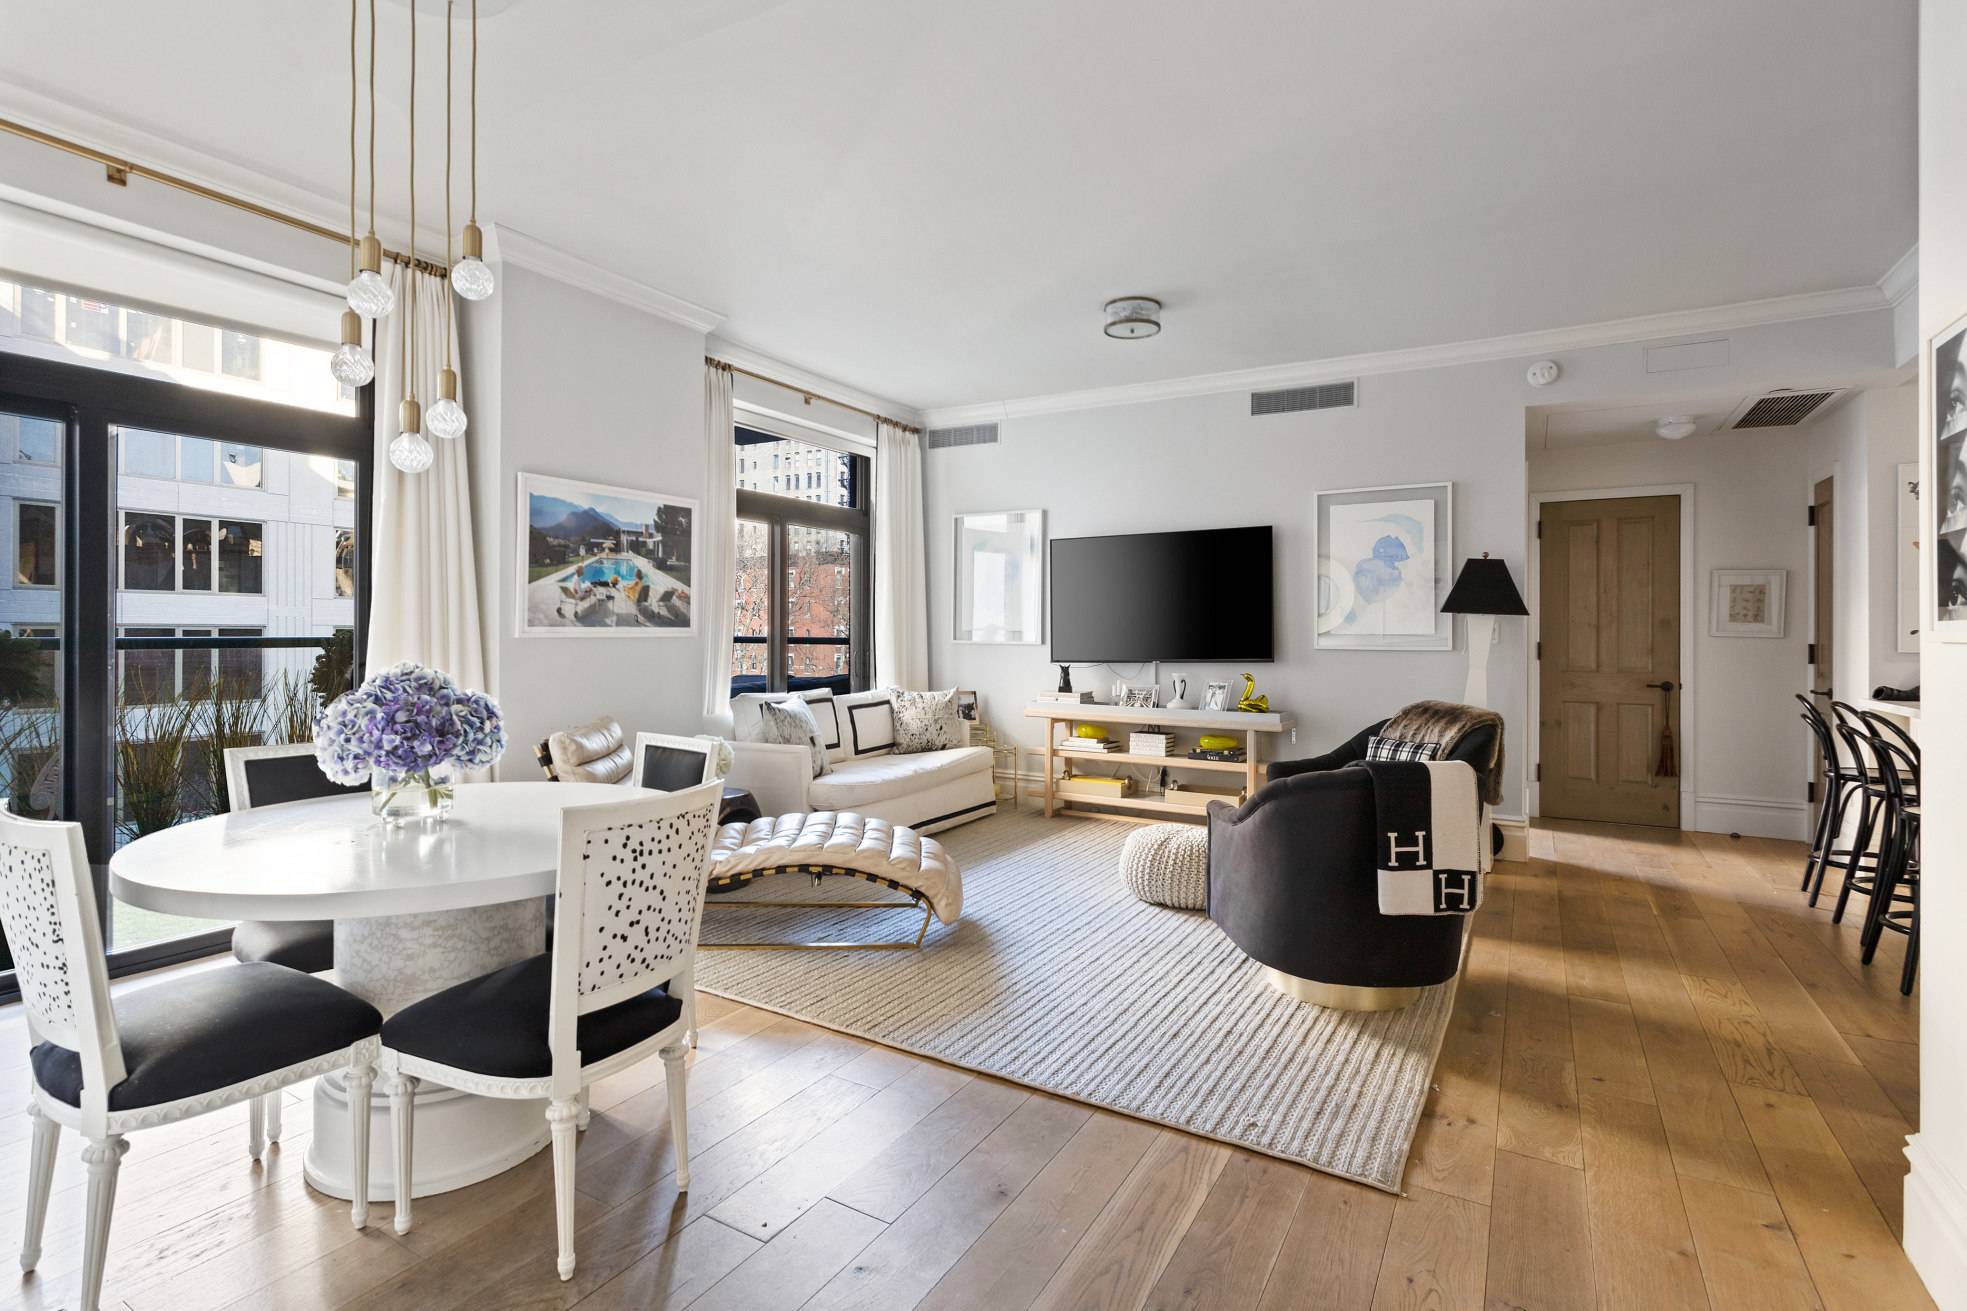 Situated within a prime Nolita meets Soho location, this gracious 2 bedroom half floor residence with private terrace in a recently constructed amp ; LEED Gold certified development awaits its ...